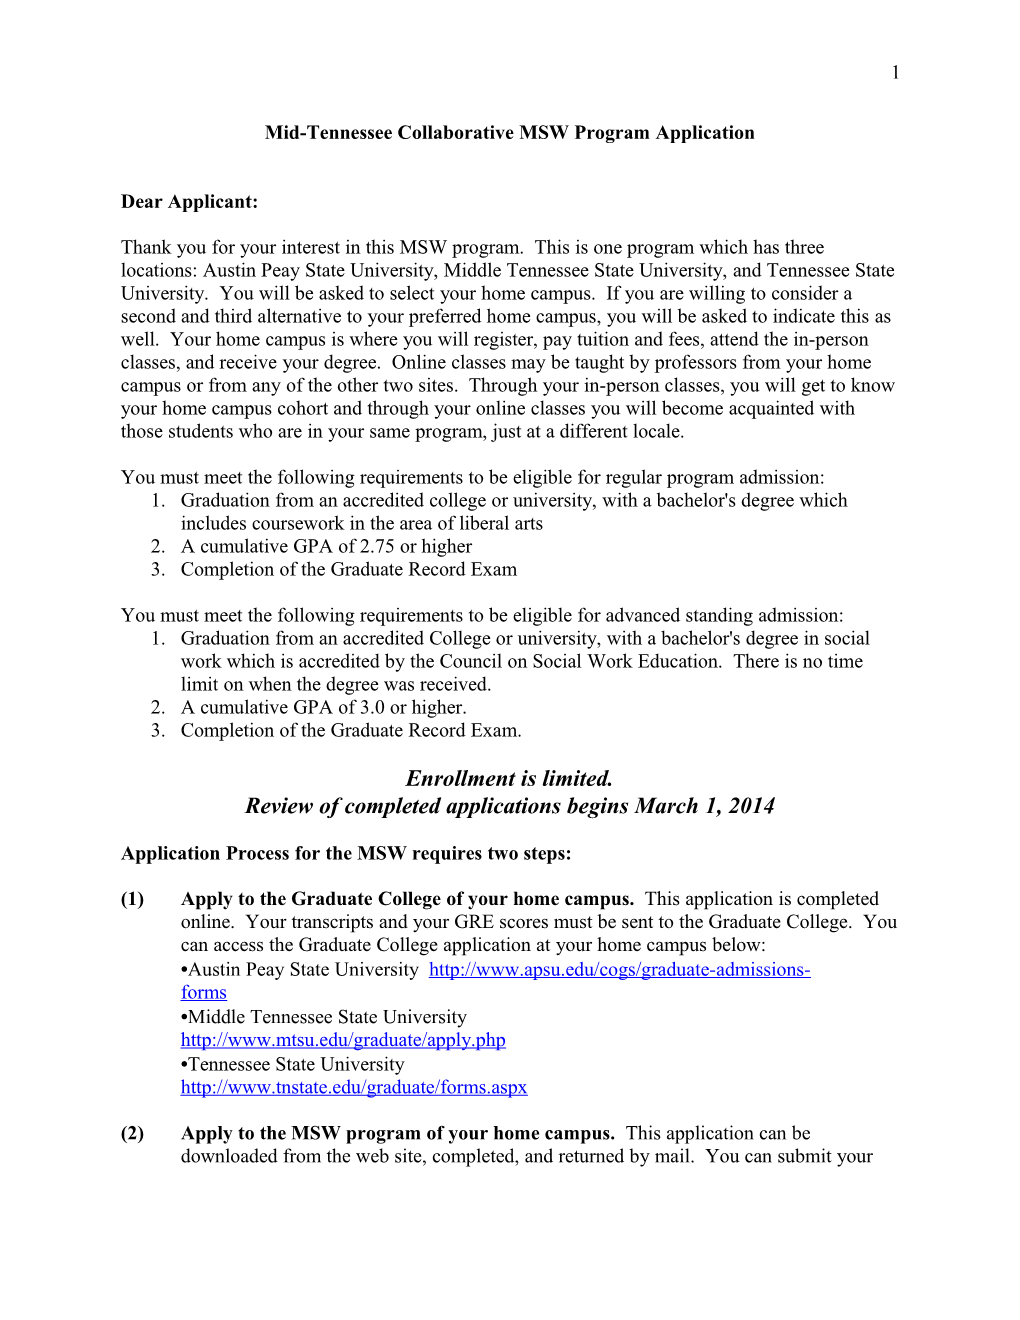 Mid-Tennessee Collaborative MSW Program Application